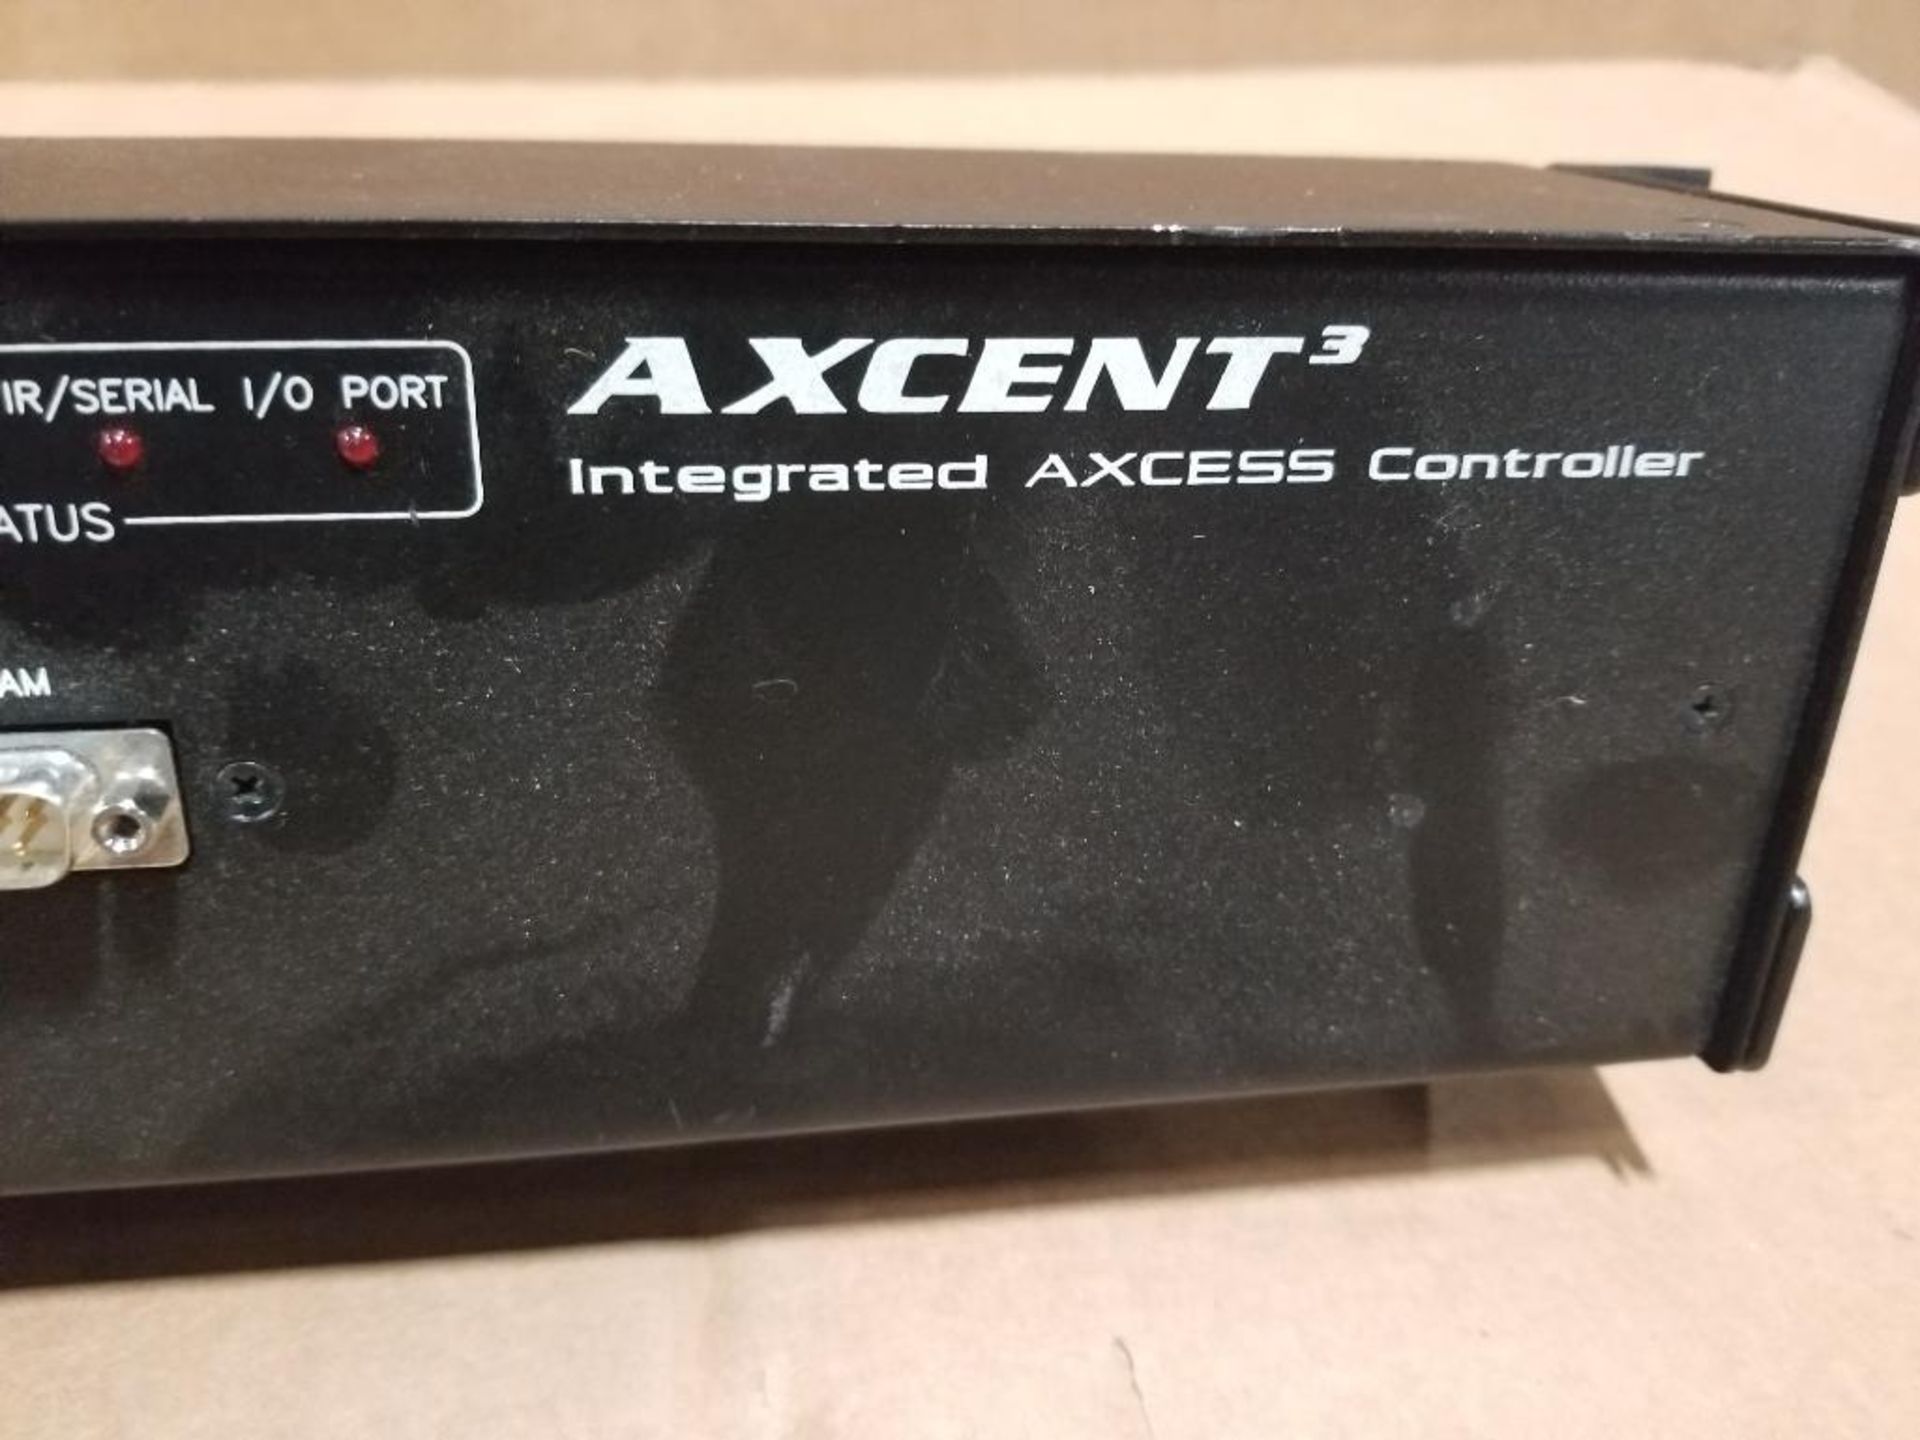 Axcent integrated access controller and Vorne Industries display. - Image 6 of 7